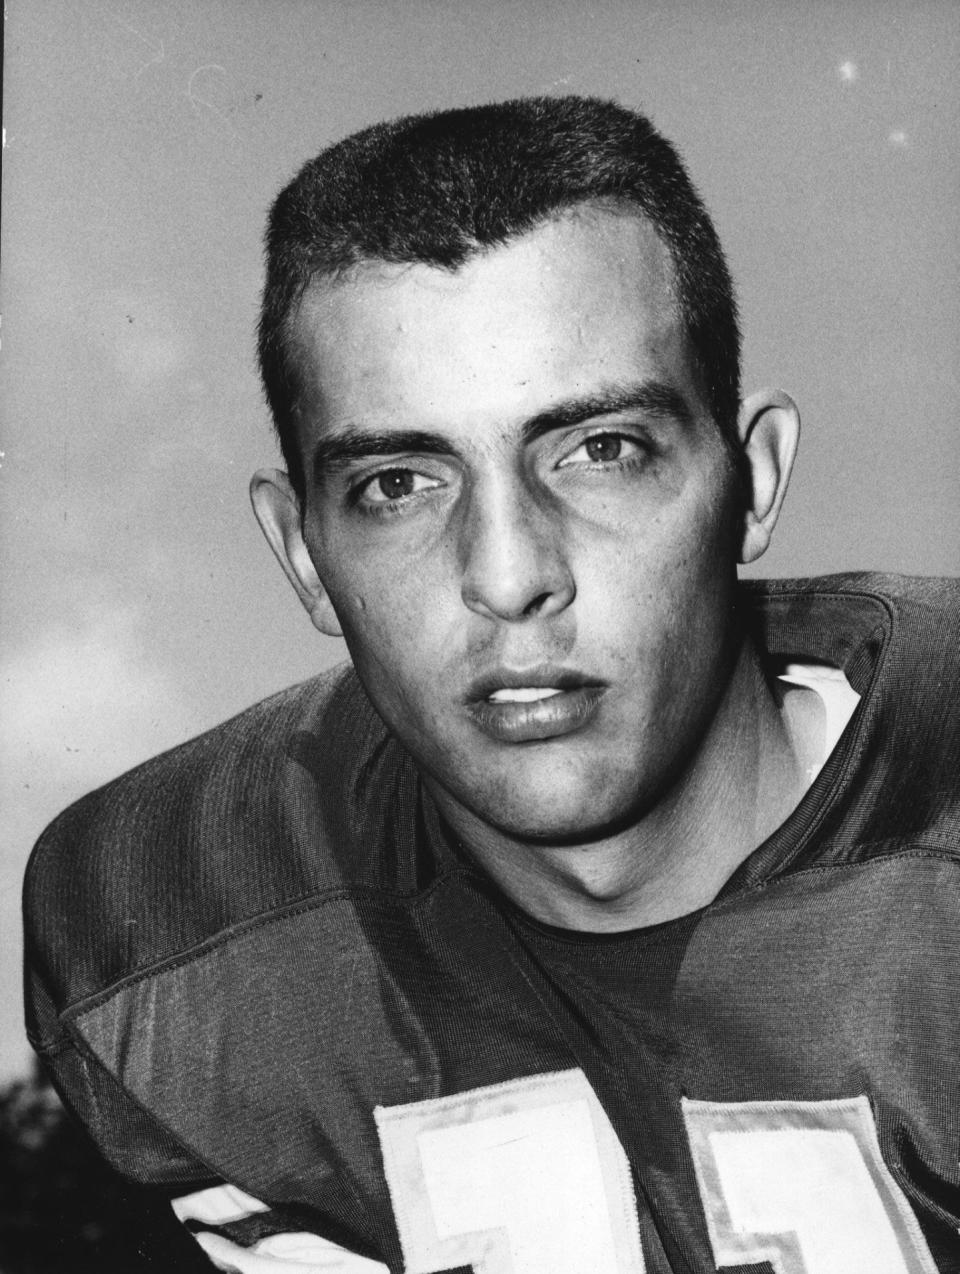 Ron Vander Kelen was a revelation for the Badgers in the 1962 season.